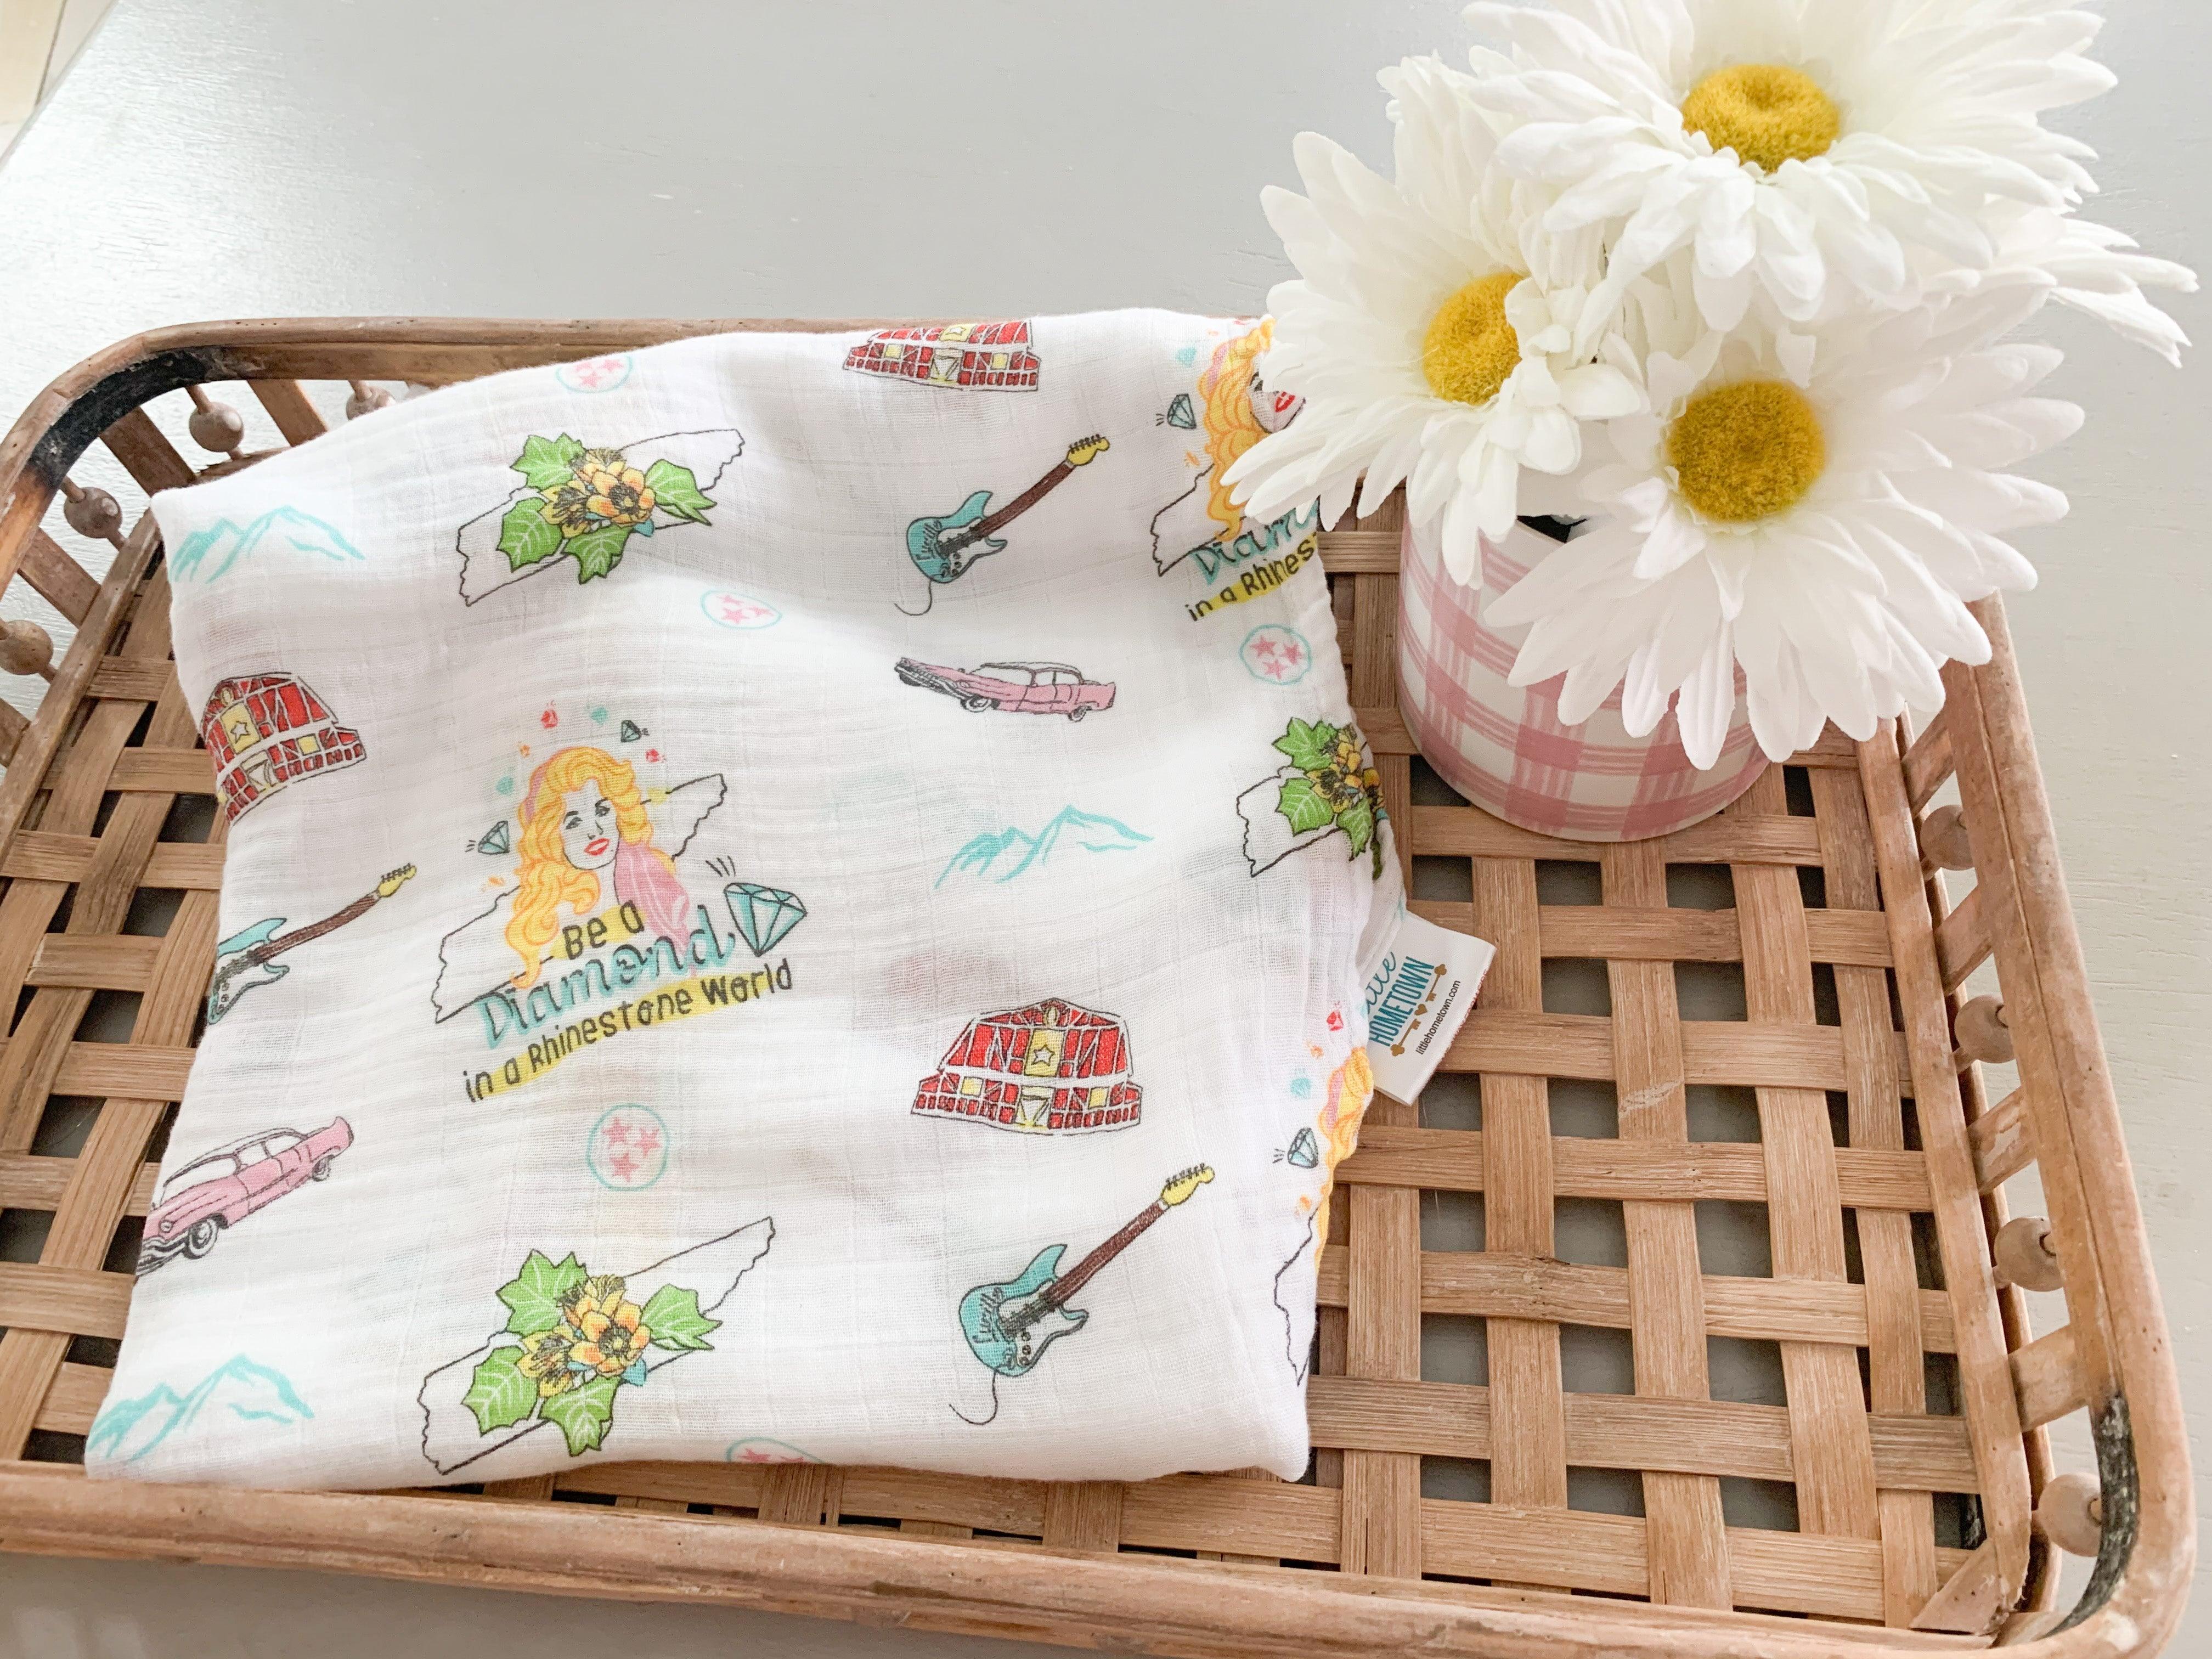 Gift Set: Tennessee Baby Muslin Swaddle Blanket and Burp Cloth/Bib Combo (Floral) by Little Hometown - Vysn